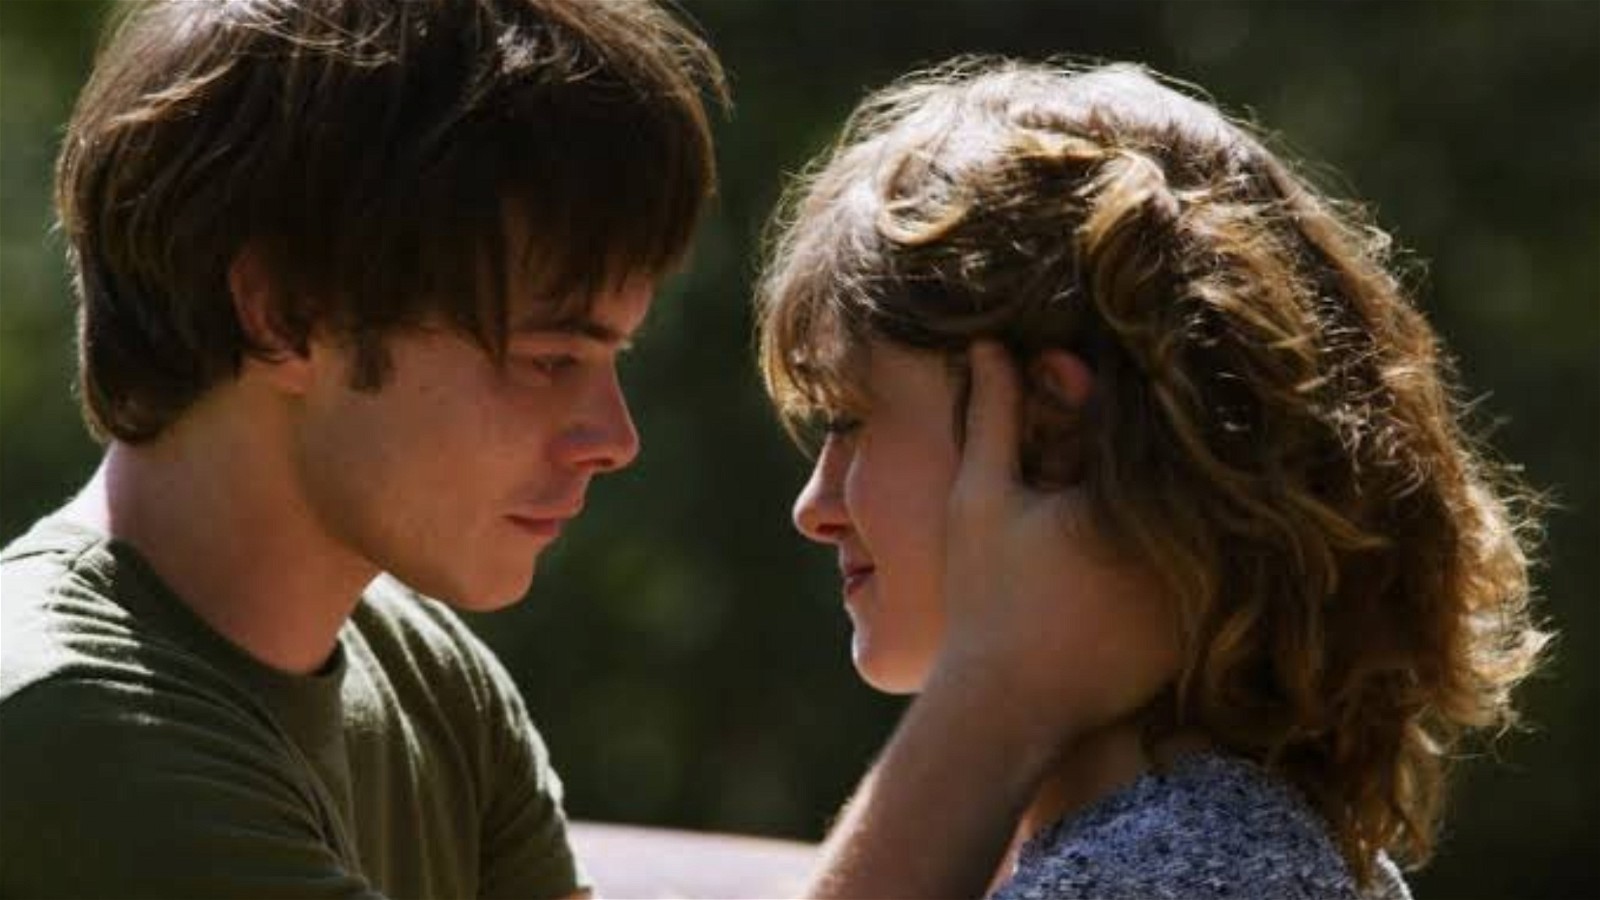 Jonathan and Nancy share a romantic moment in Stranger Things